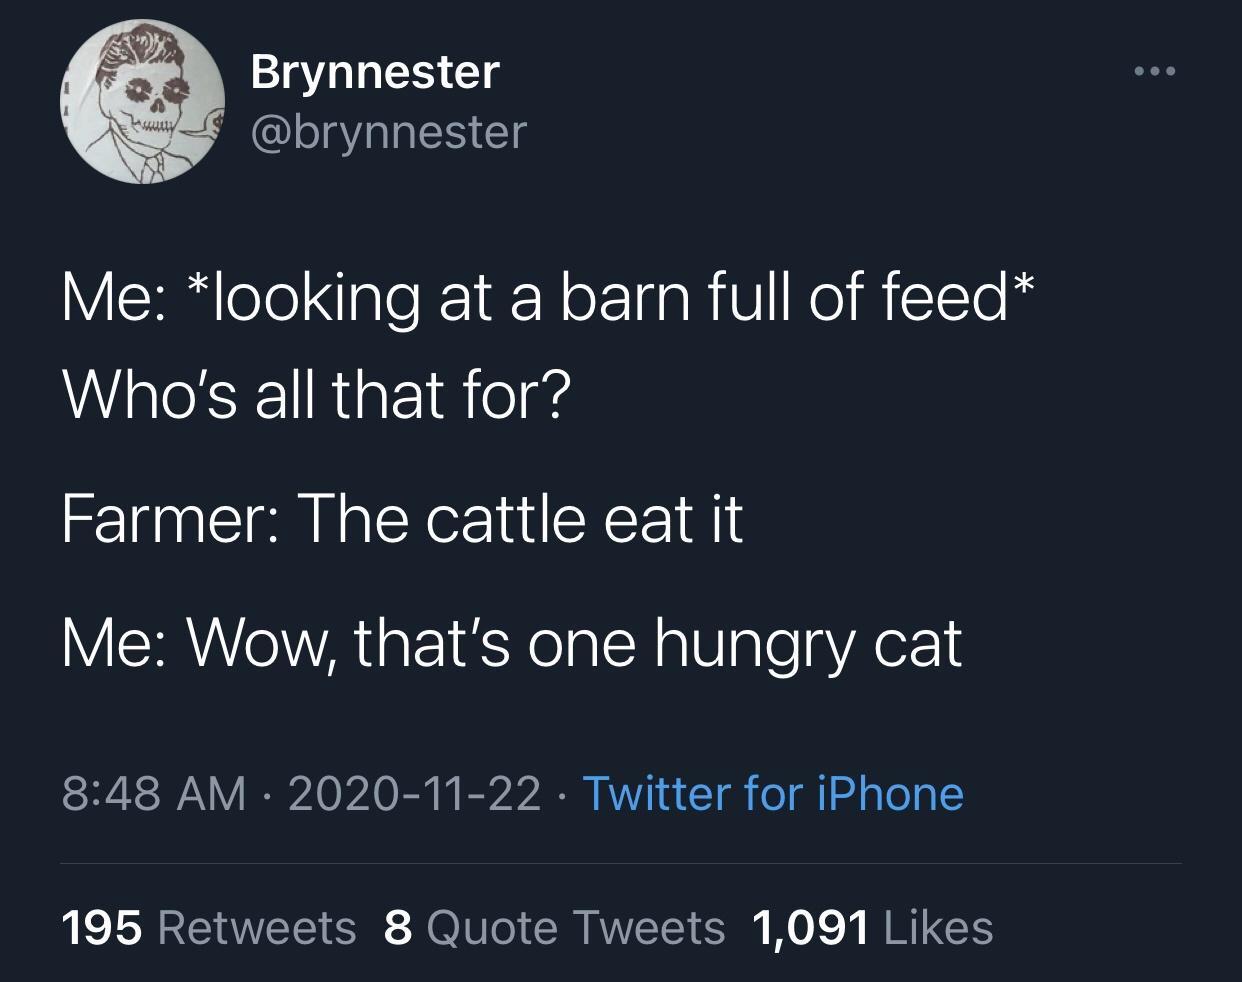 Sepahtu - Brynnester Las Me looking at a barn full of feed Who's all that for? Farmer The cattle eat it Me Wow, that's one hungry cat Twitter for iPhone 195 8 Quote Tweets 1,091